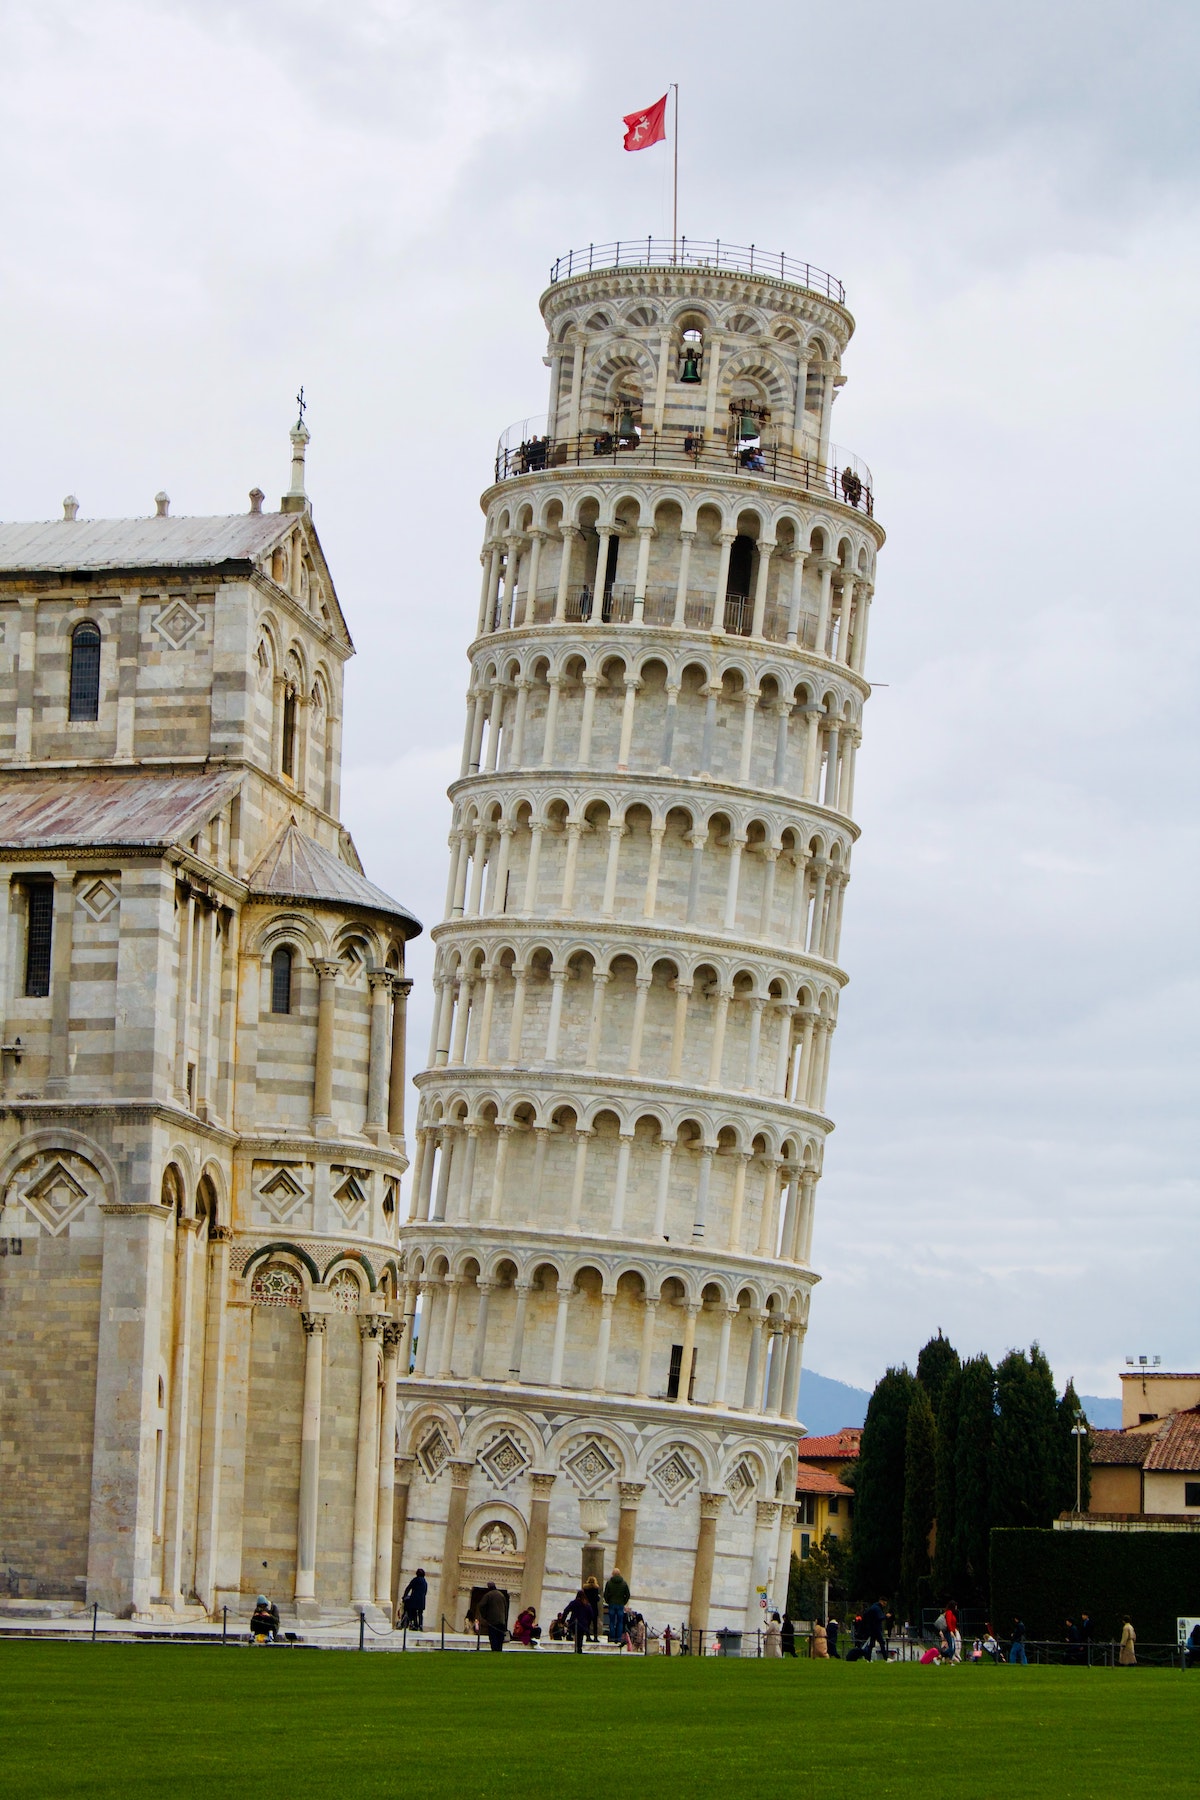 Tall white leaning tower on a cloudy day